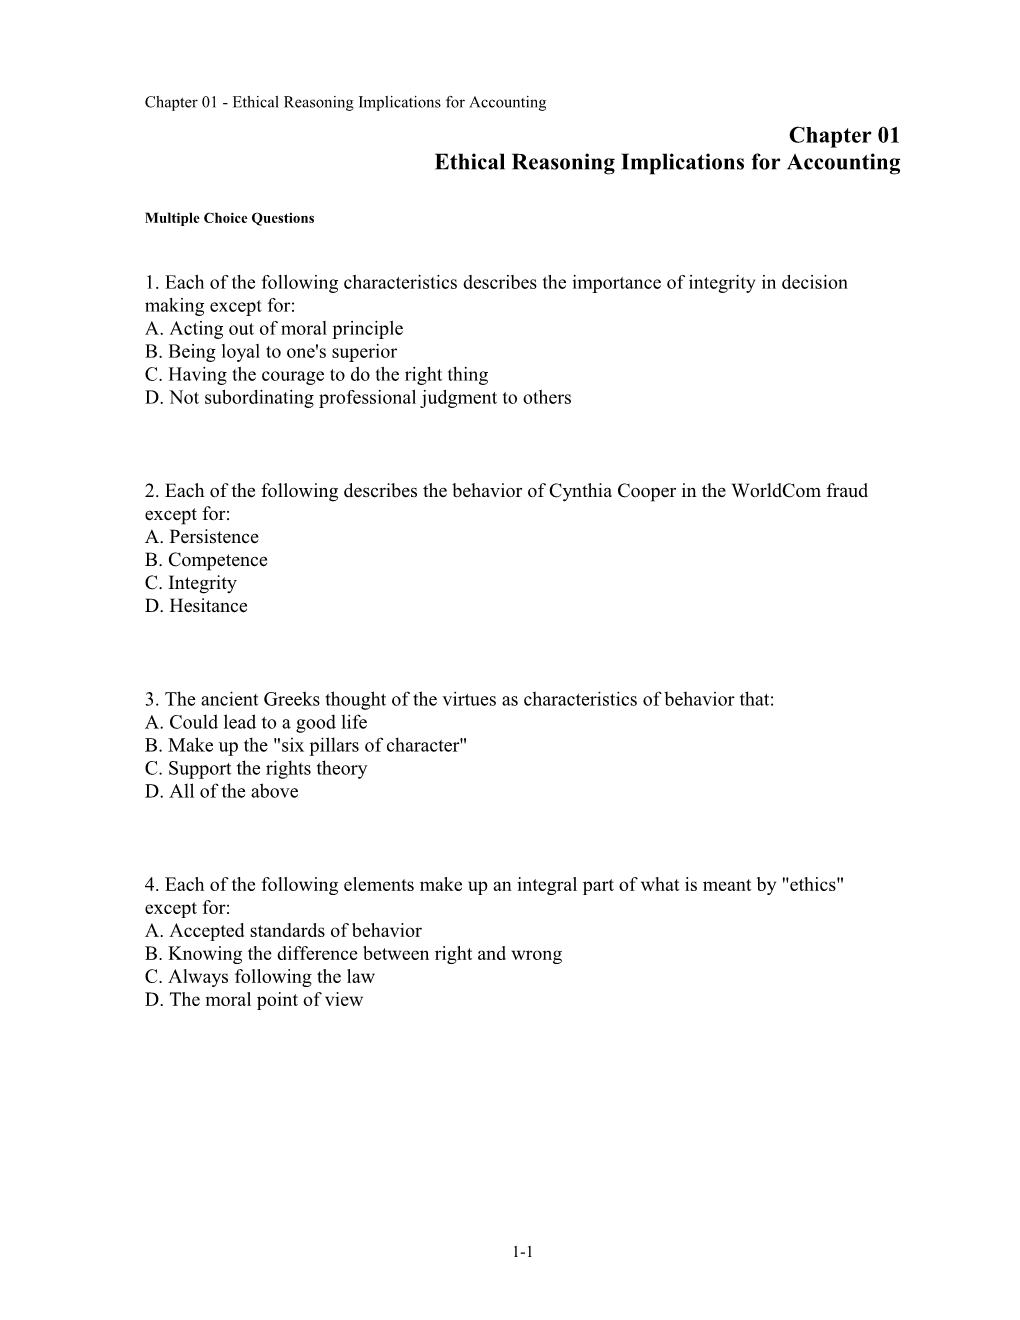 Chapter 01 Ethical Reasoning Implications for Accounting